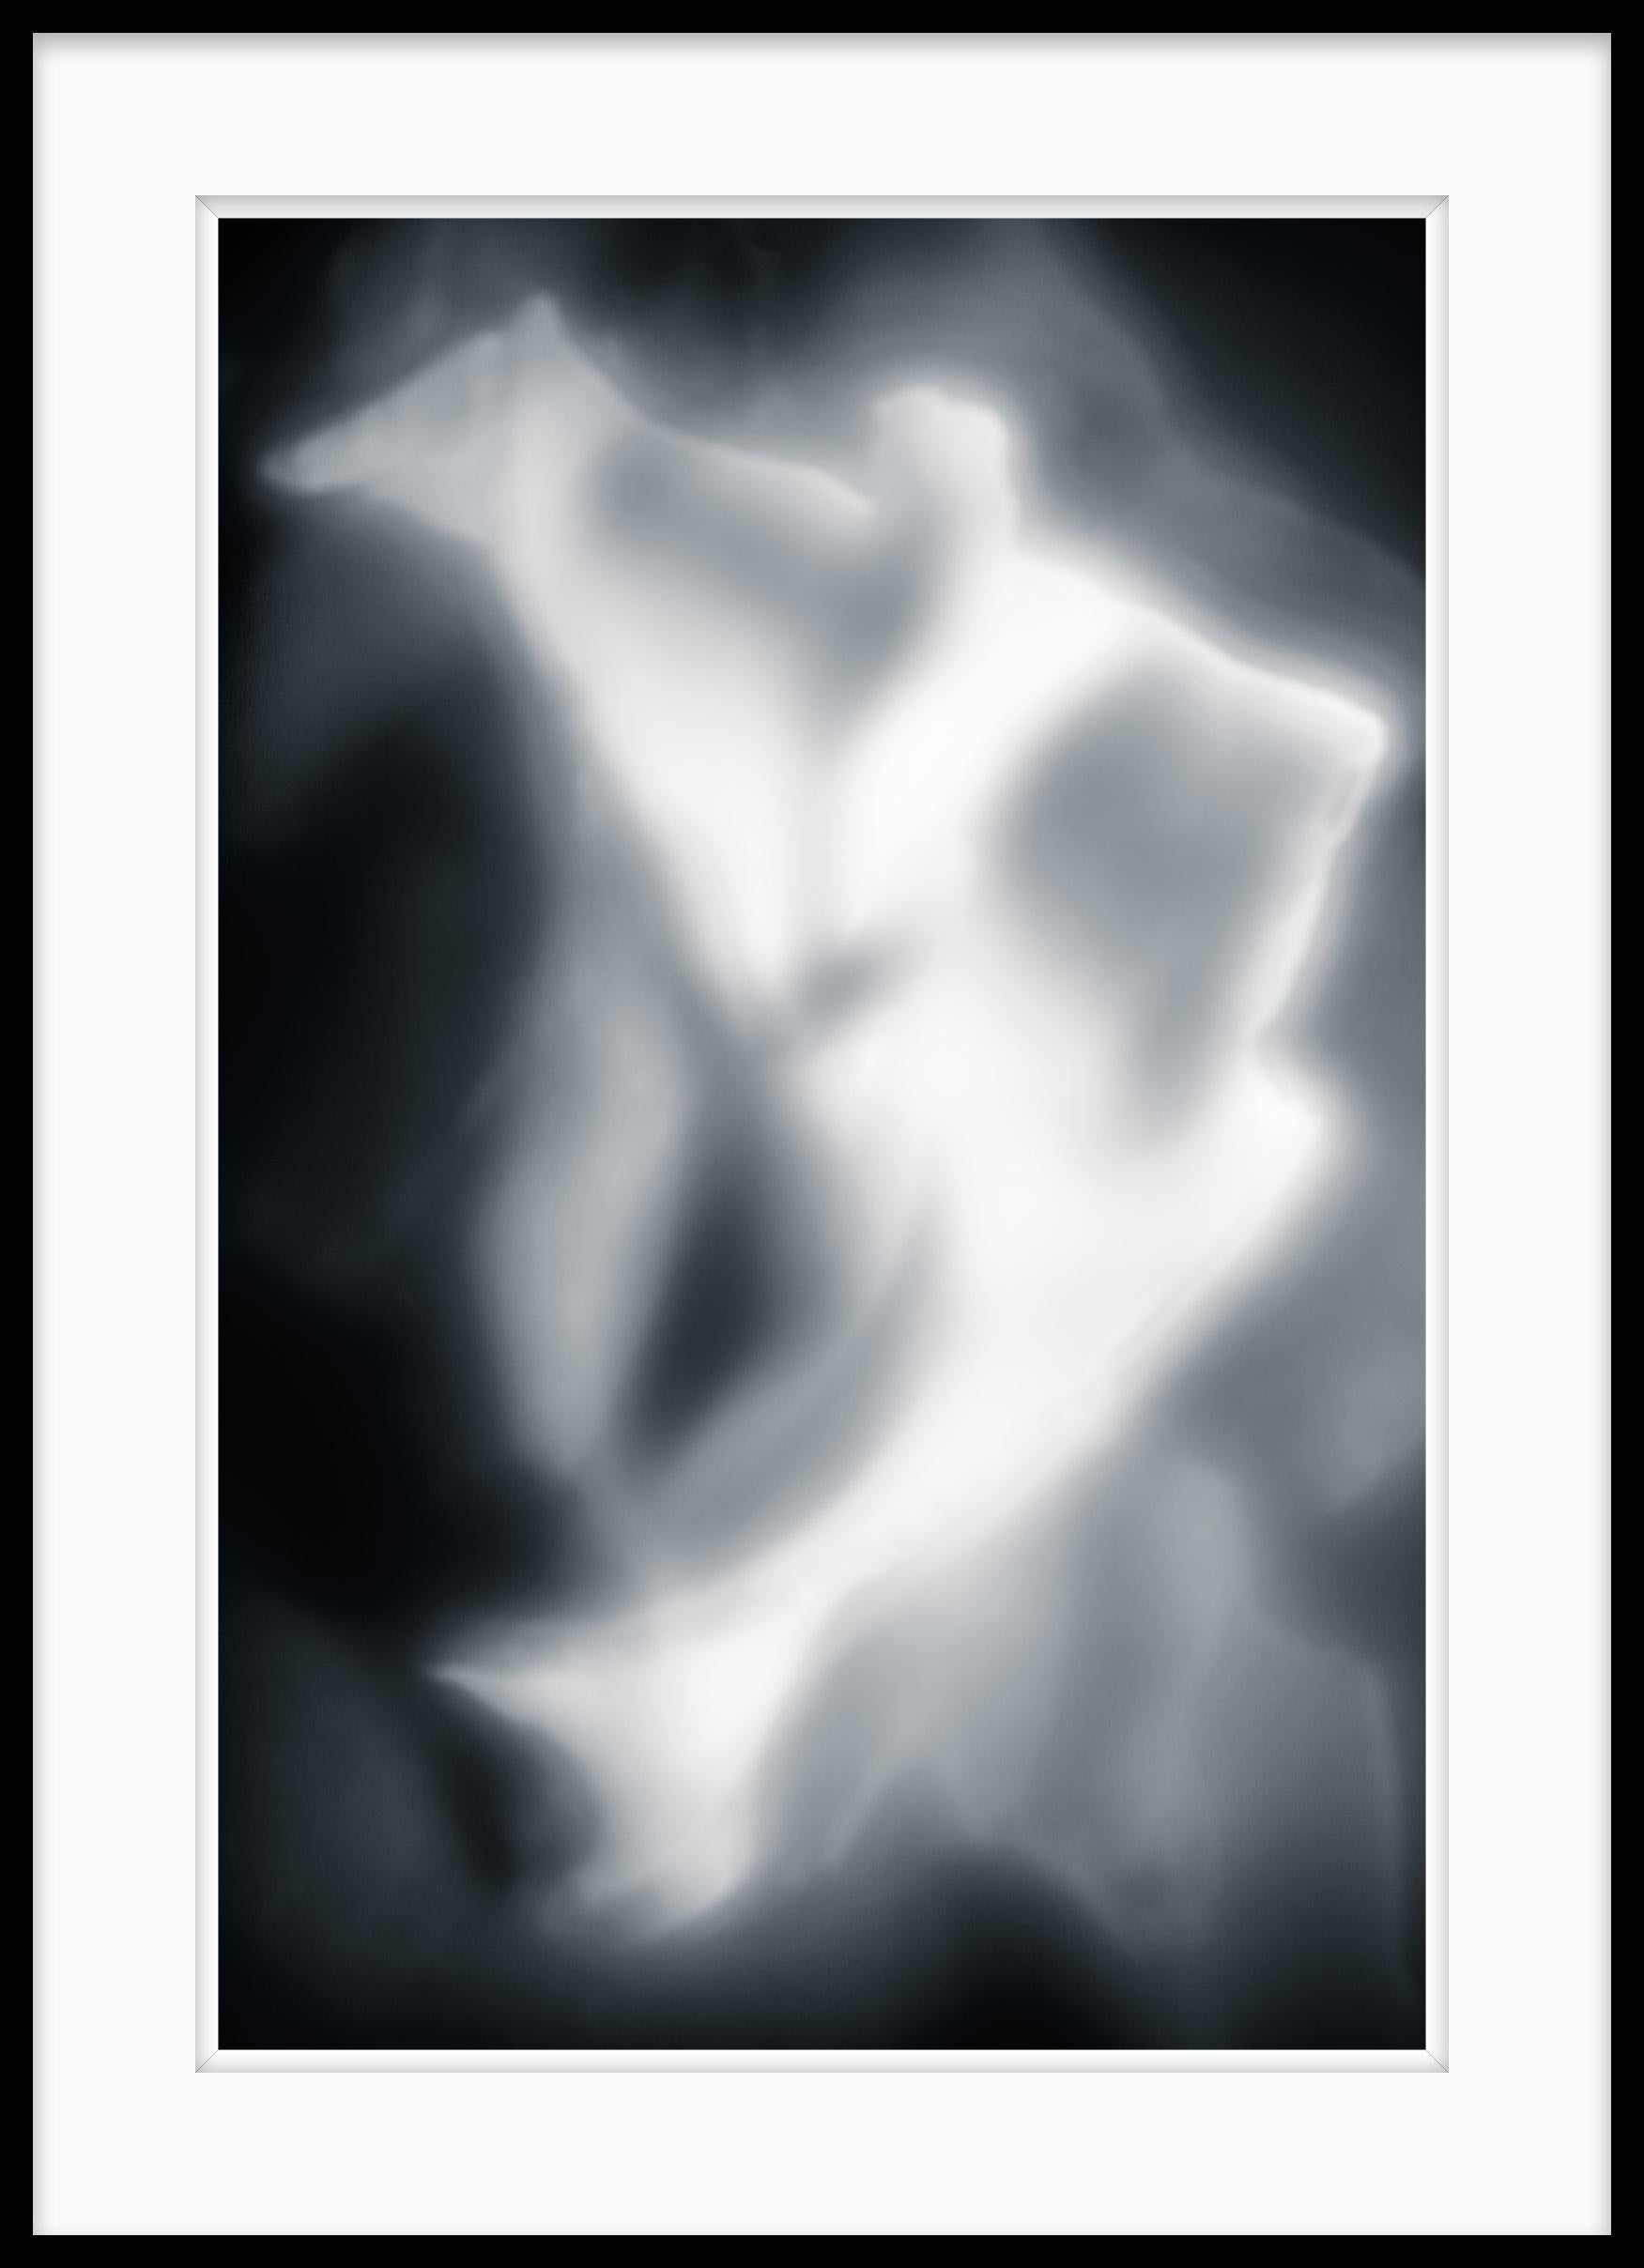 Limited Edition Black and White Photograph - Moments of Evolution #21 20 x 24

Moments of Evolution explores the transformations of organic forms as they evolve into an endless array of ethereal configurations.

The subjects float, shifting scale,